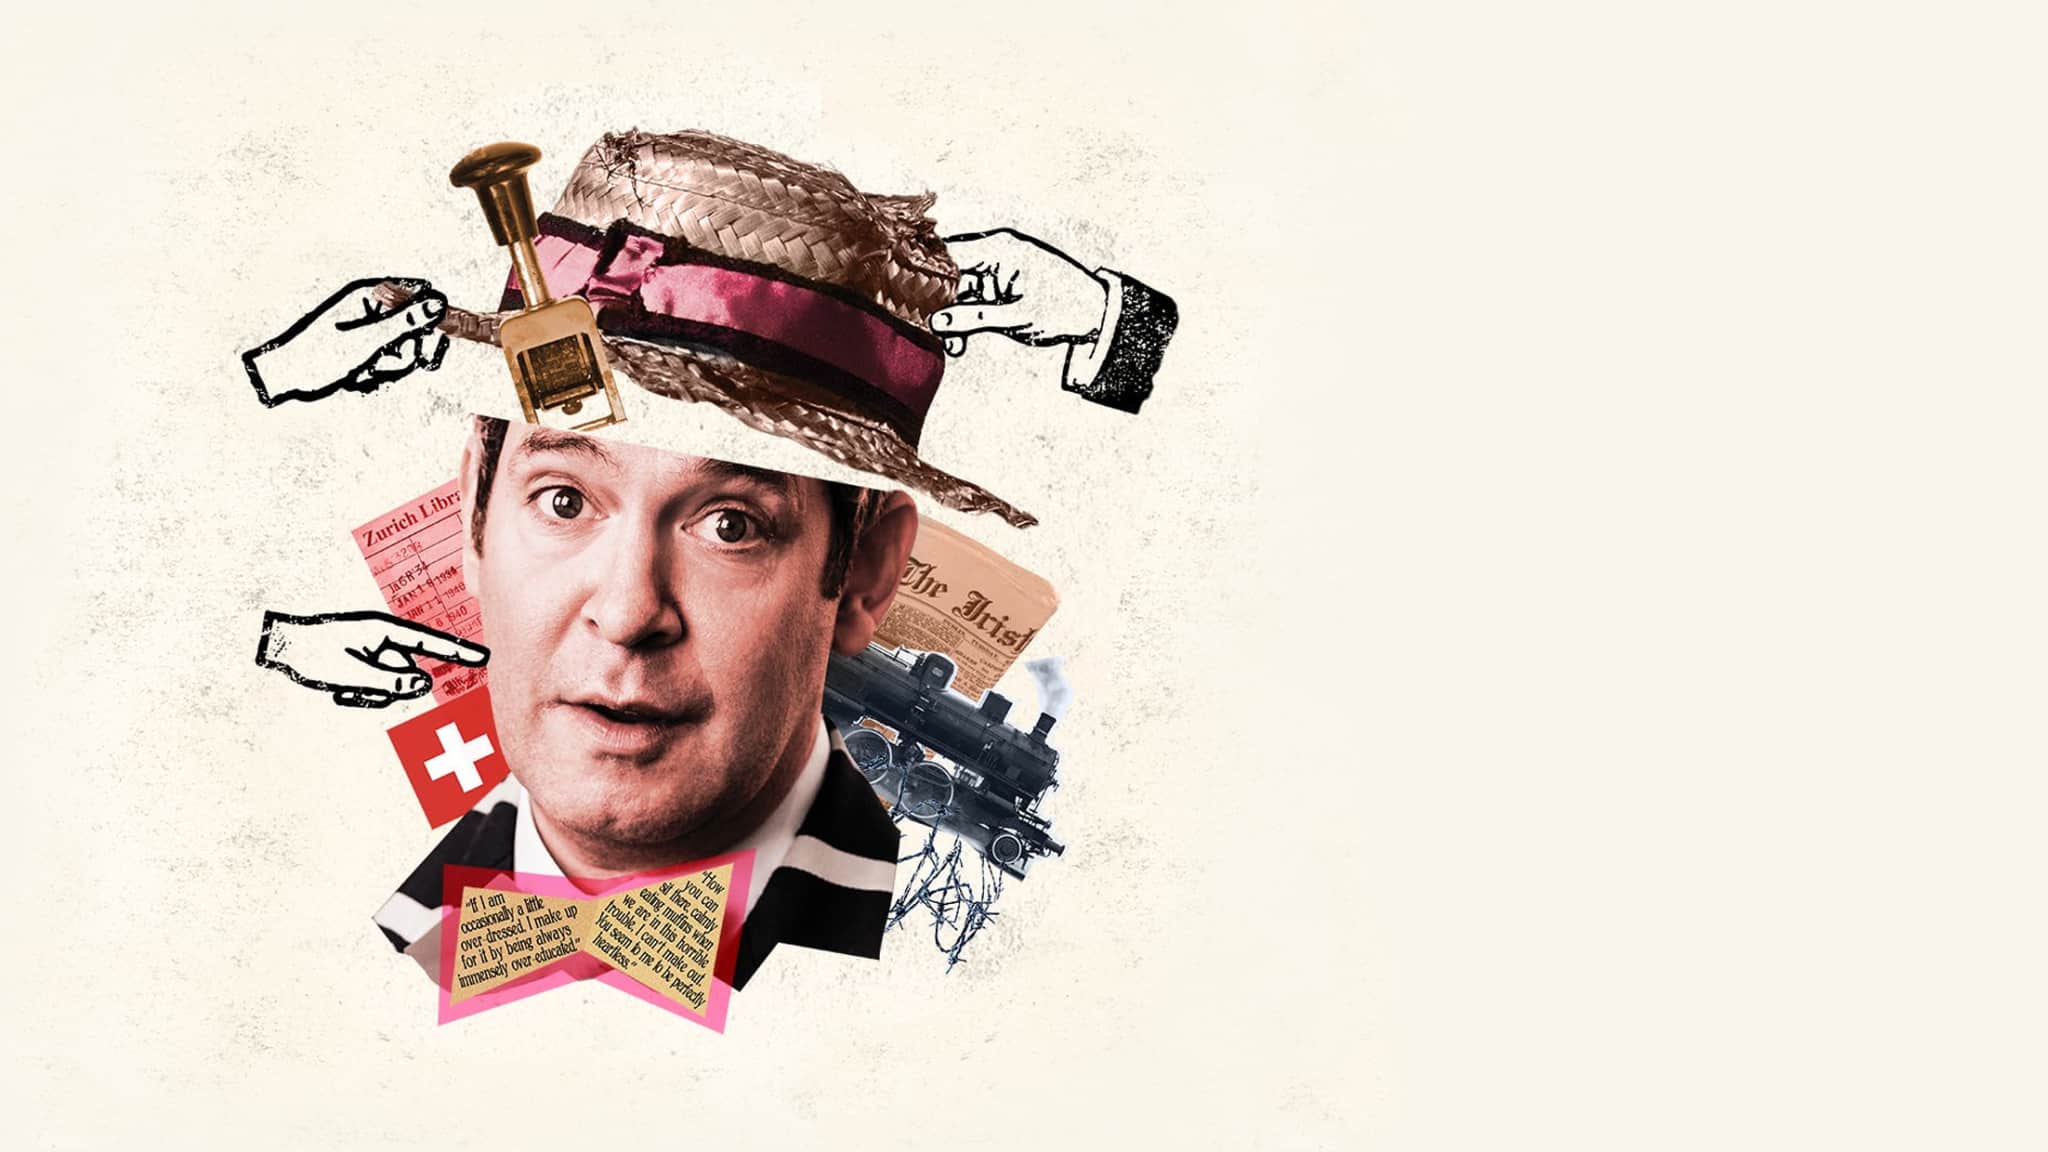 Artwork for TRAVESTIES. A cutout of a man's head and neck. A collage of items surrounds him, such has a hat, a bowtie made of newspaper, and fingers pointing and pulling at him.